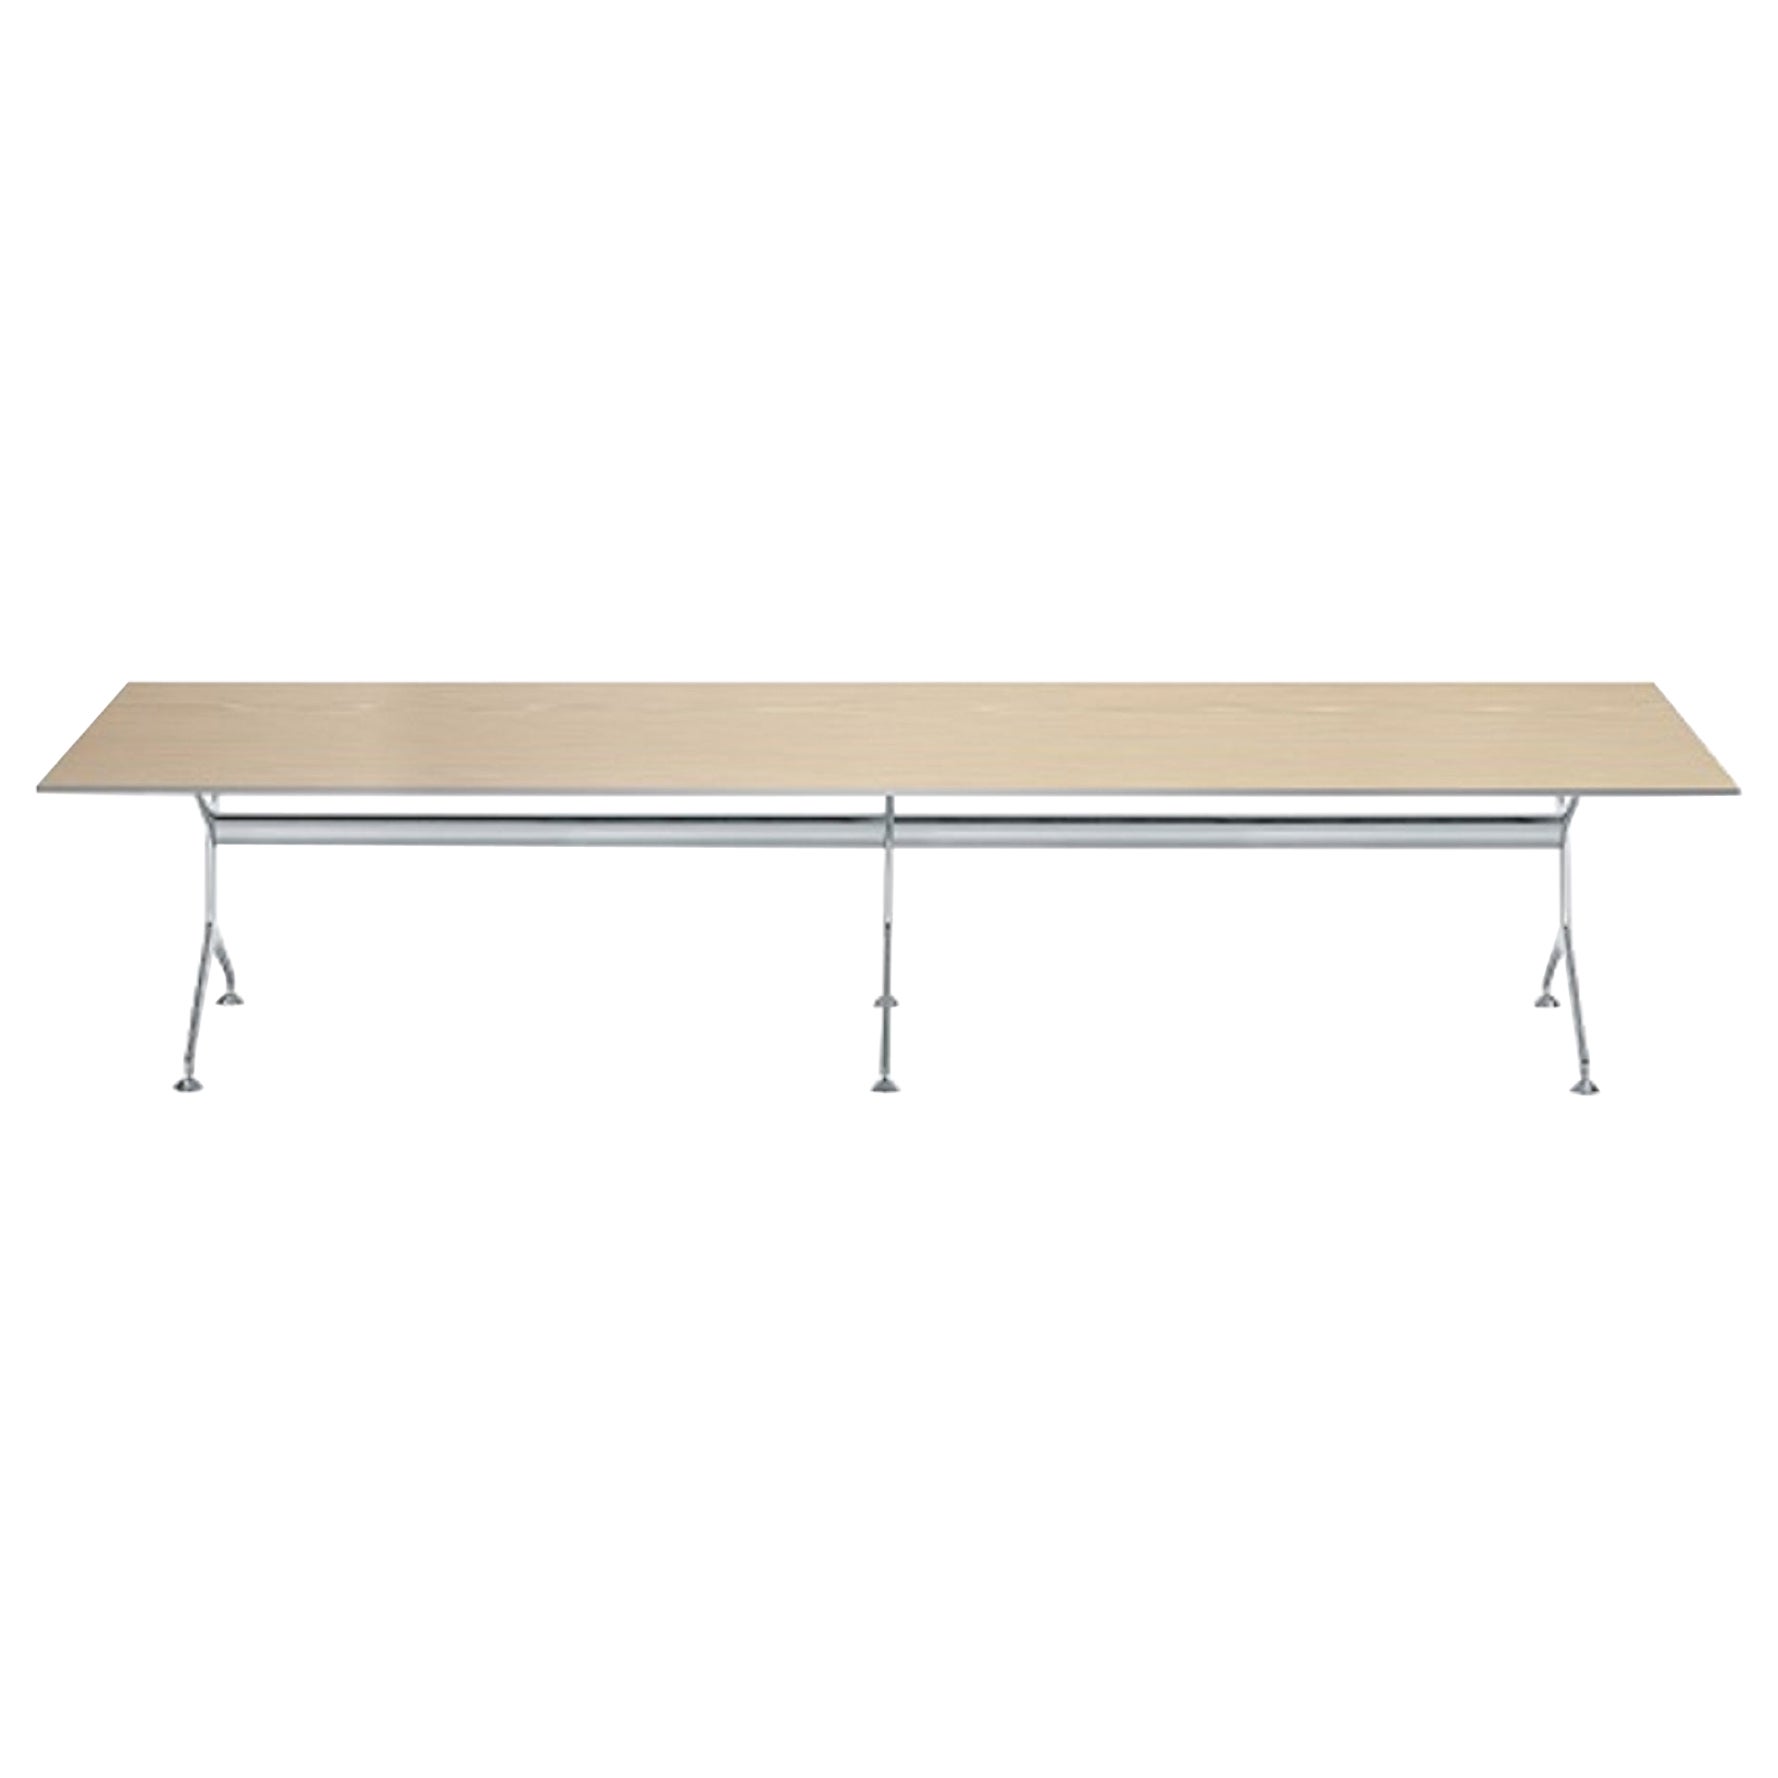 Alias Frametable 295XL in Whitened Oak Top with Polished Aluminium Frame For Sale